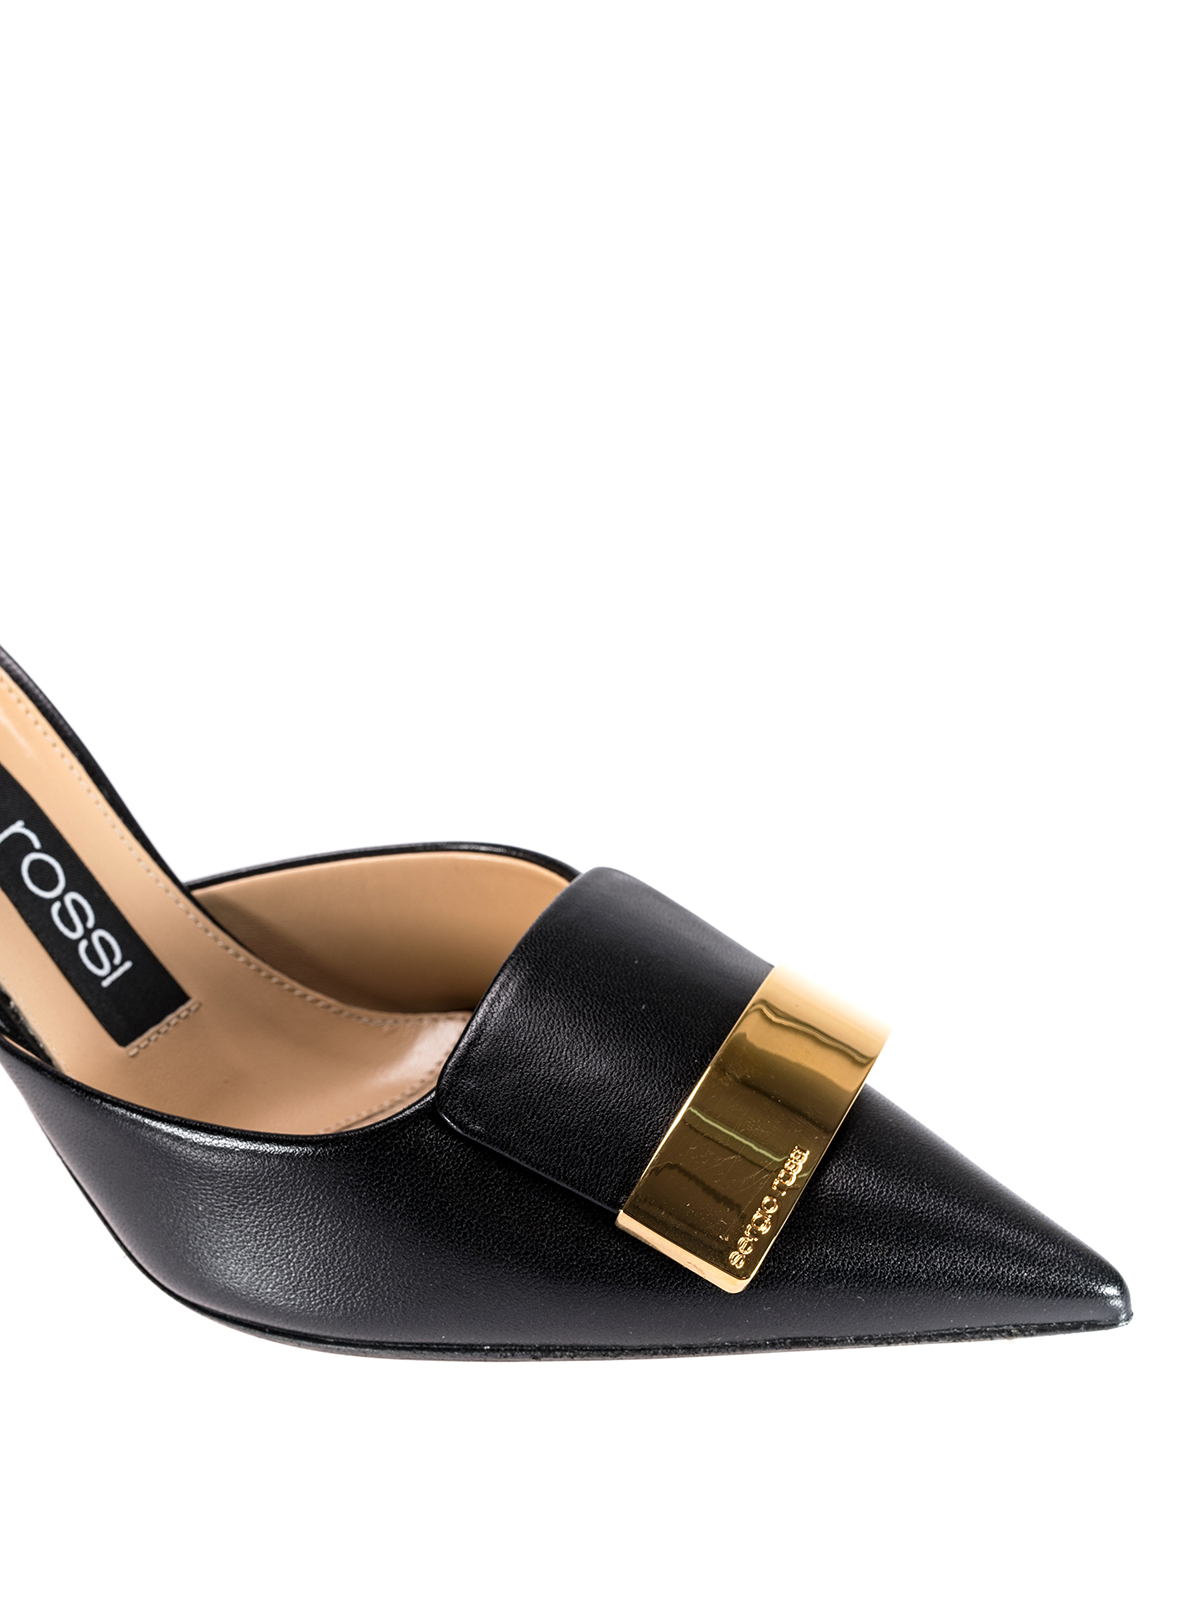 Mules shoes Sergio Rossi - sr1 black leather mules 